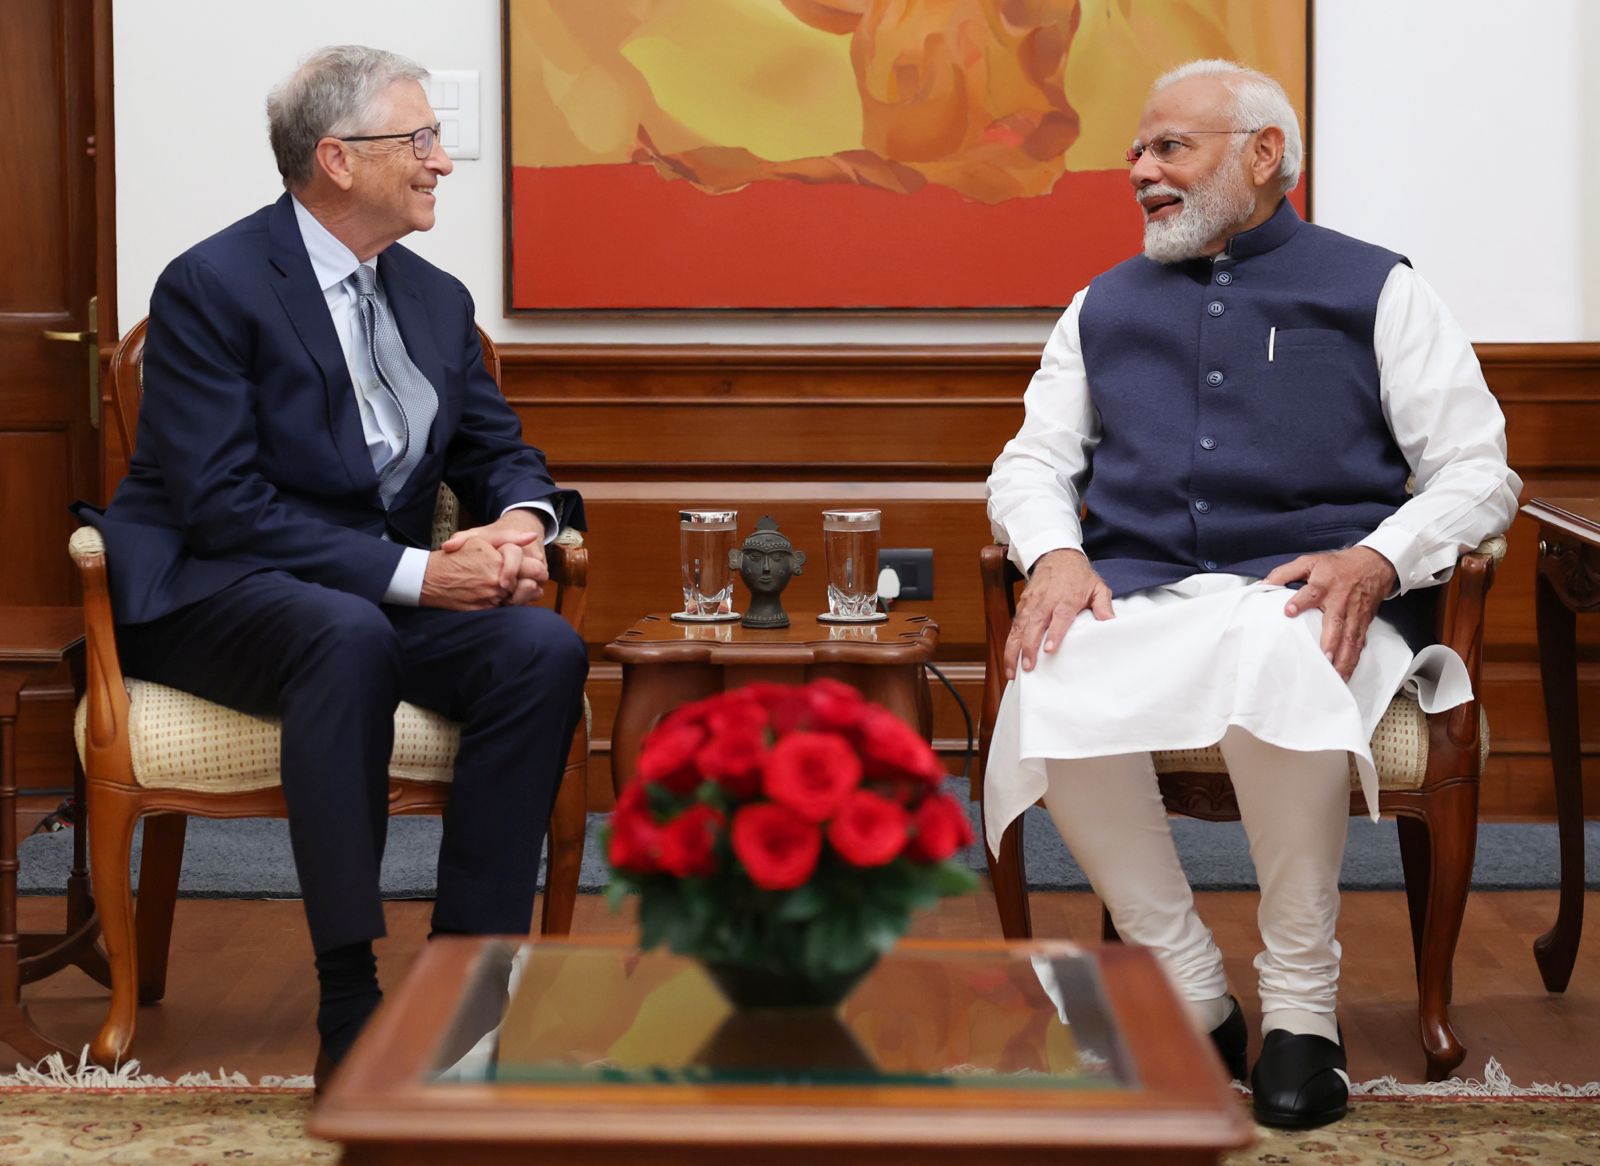 ‘we-need-to-establish-some-dos-and-donts’-bill-gates-modi-discuss-ethical-ai-use